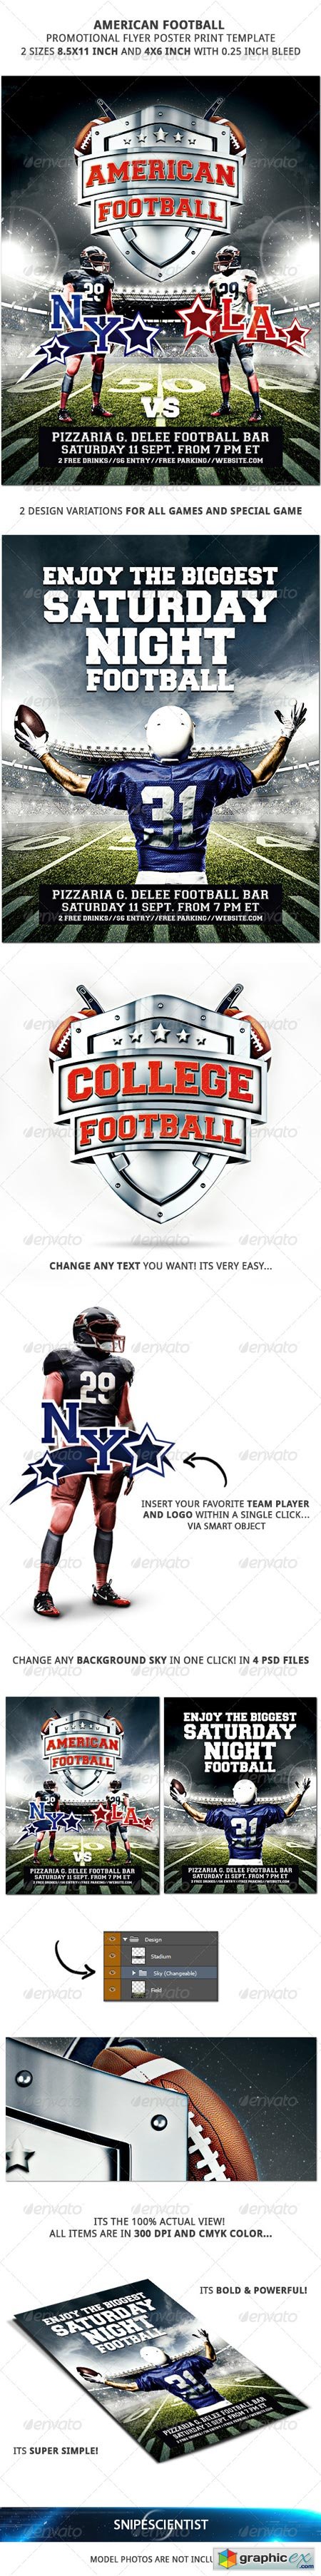 American Football Promotional Flyer Poster 2 Sizes 8603931